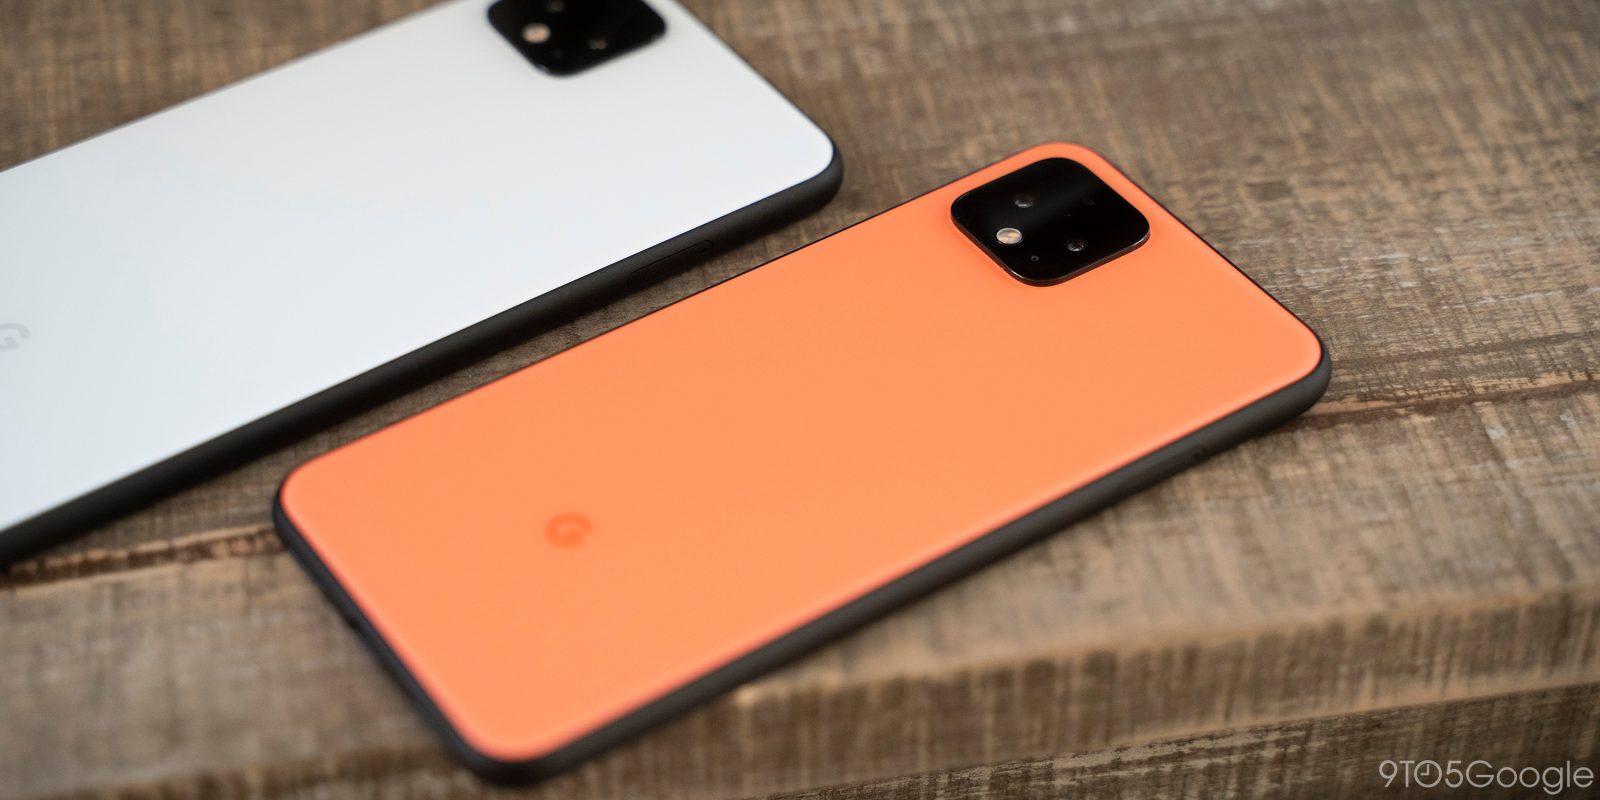 Pixel 4 holiday discount